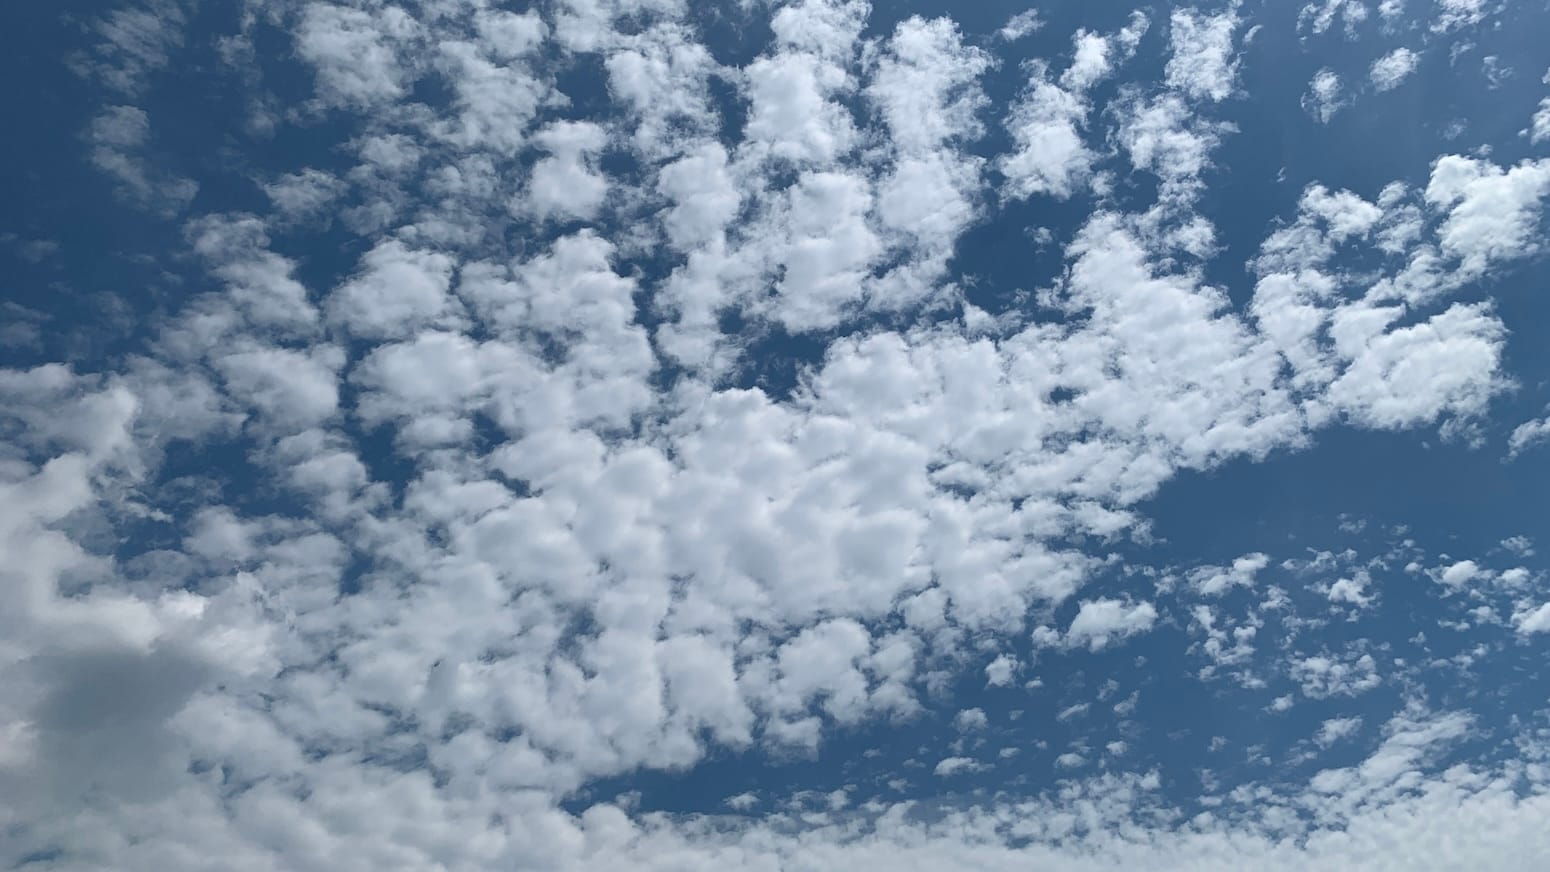 A bunch of cotton-ball-looking clouds clumped together surrounded by blue